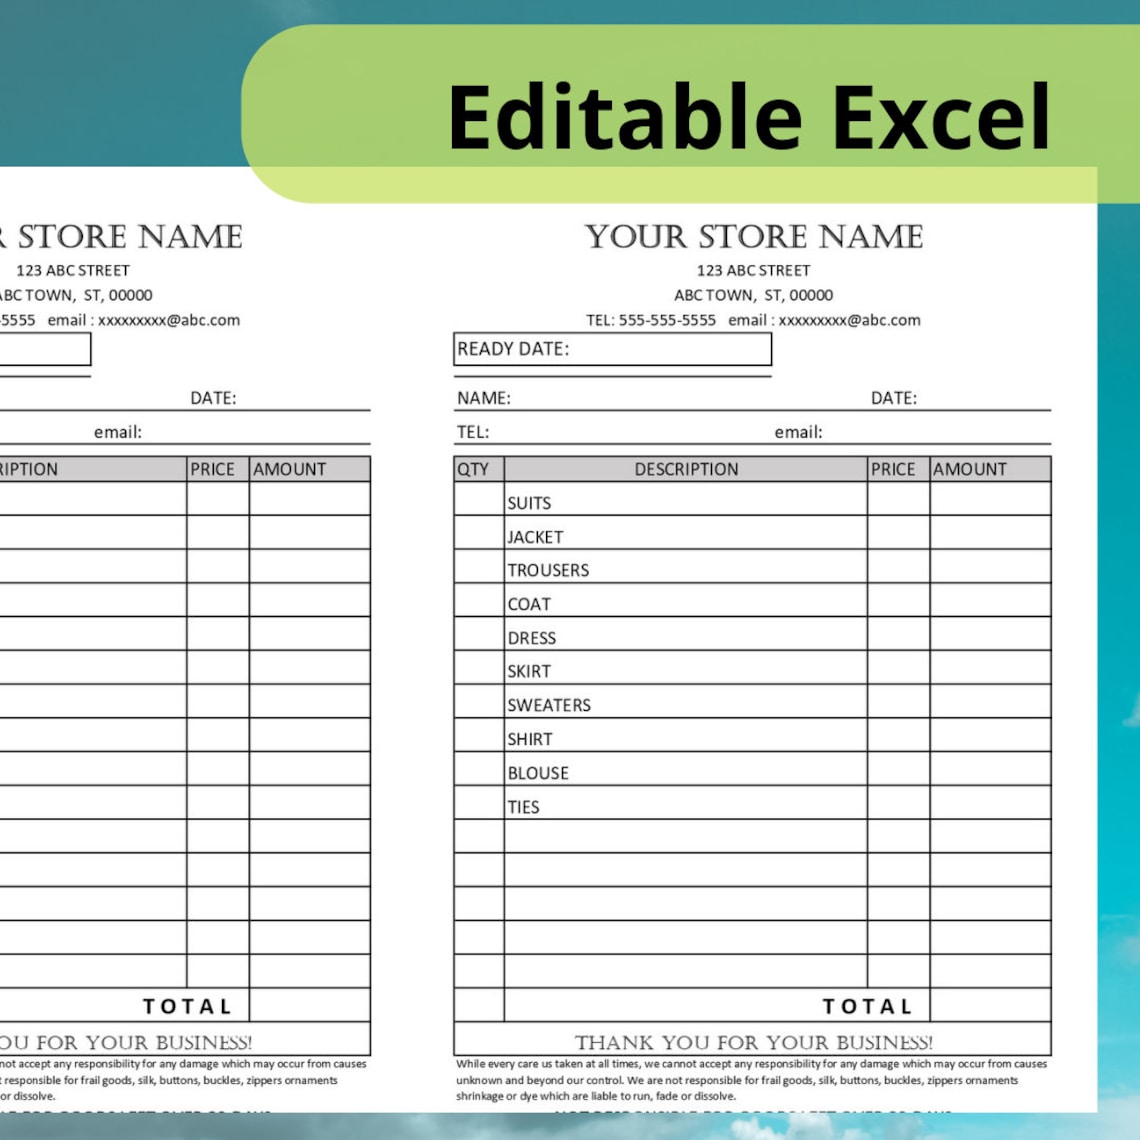 dry-cleaner-receipt-template-editable-dry-cleaning-invoice-digital-download-excel-format